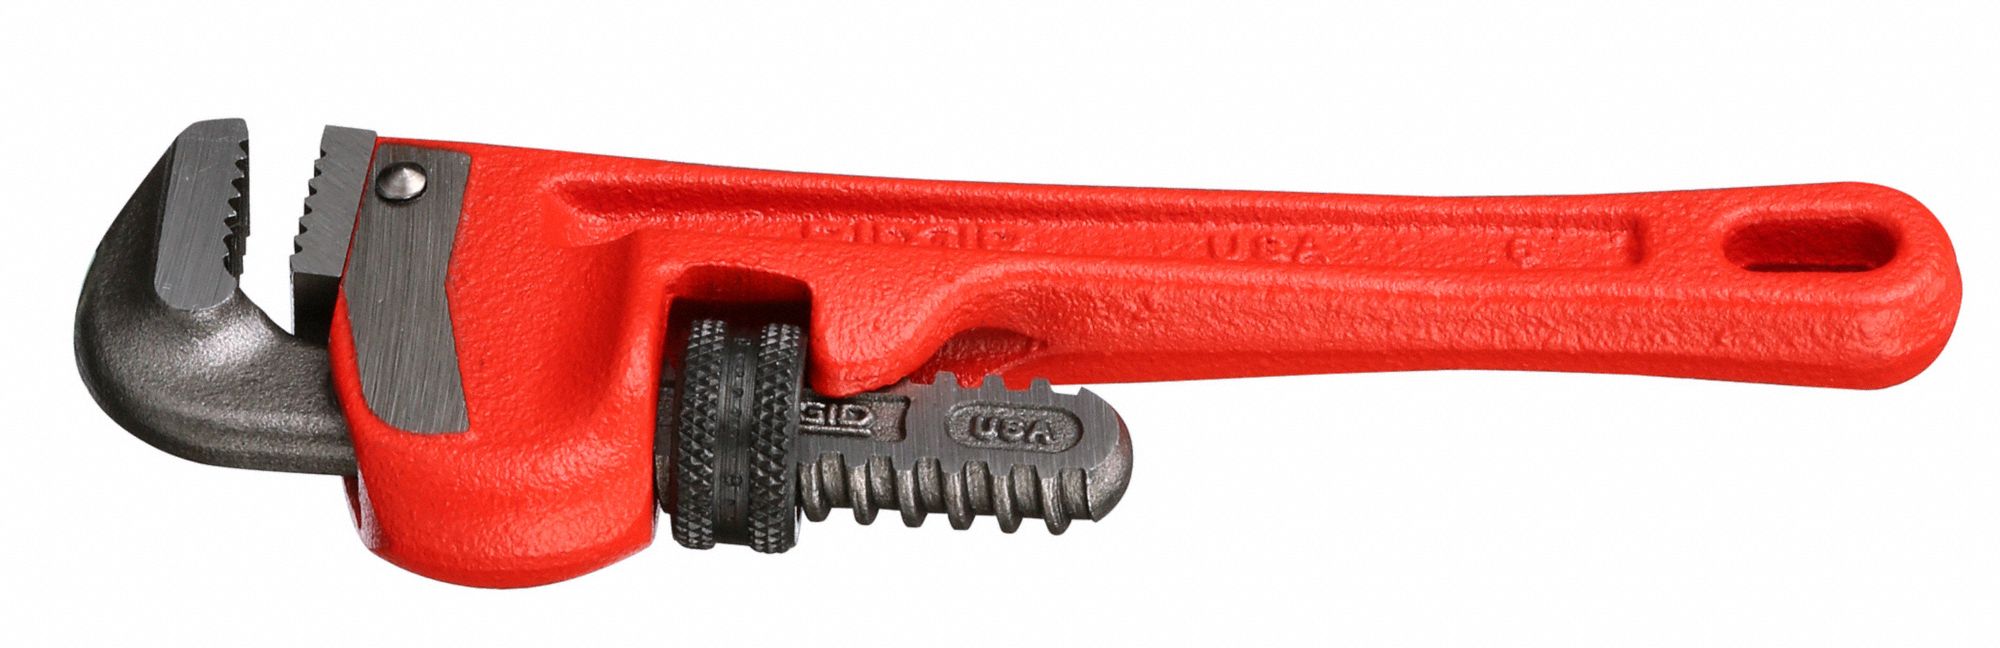 Ridgid 31000 6" Pipe Wrench Red 